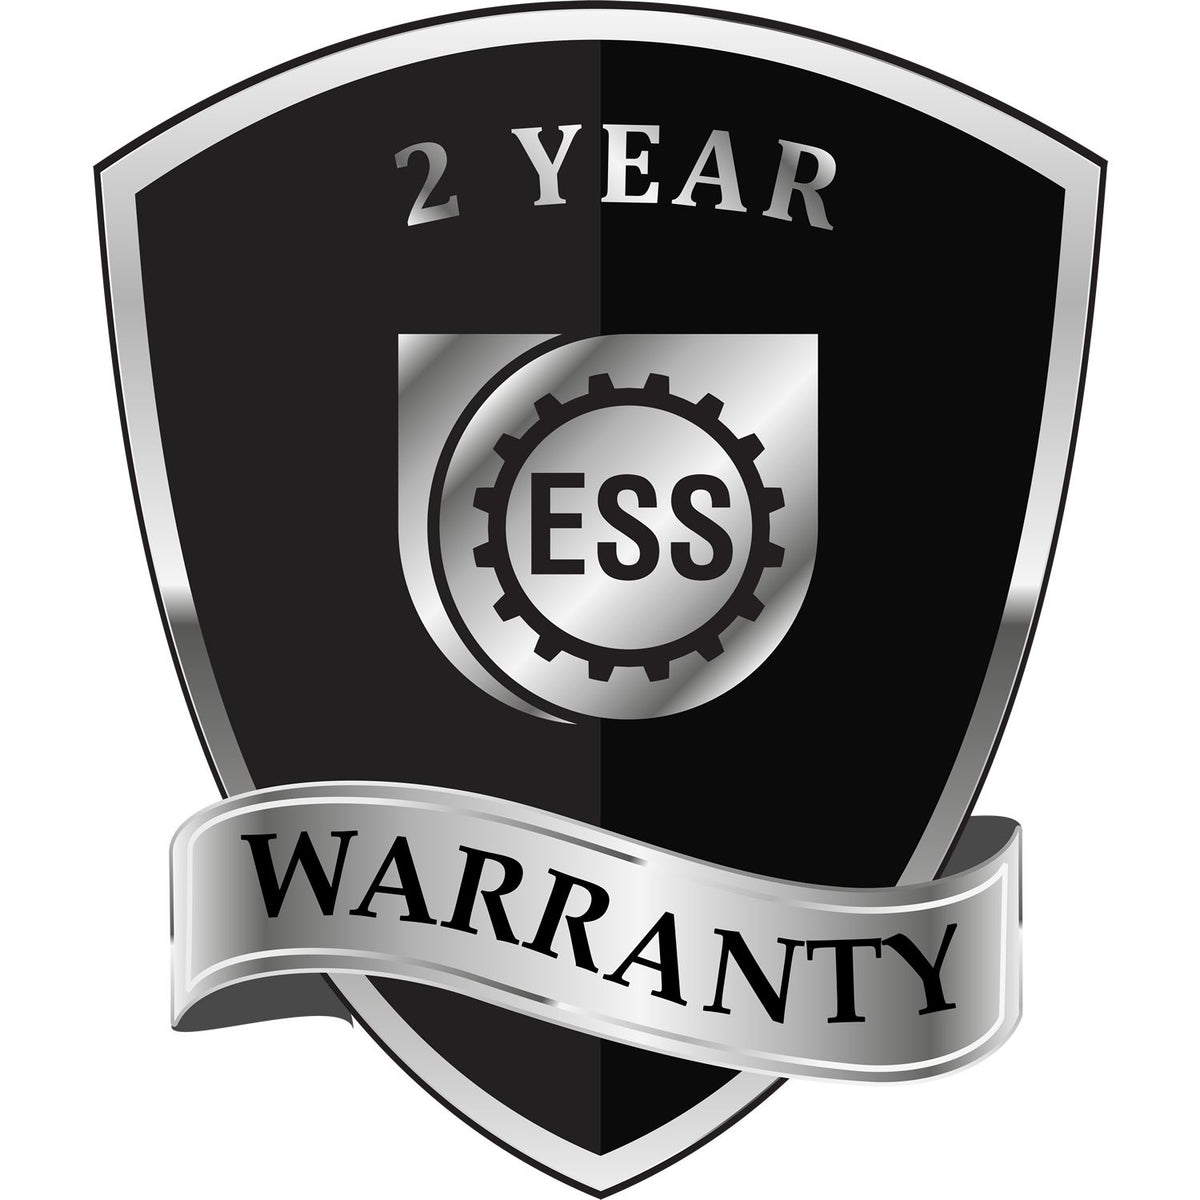 A badge or emblem showing a warranty icon for the Indiana Desk Architect Embossing Seal